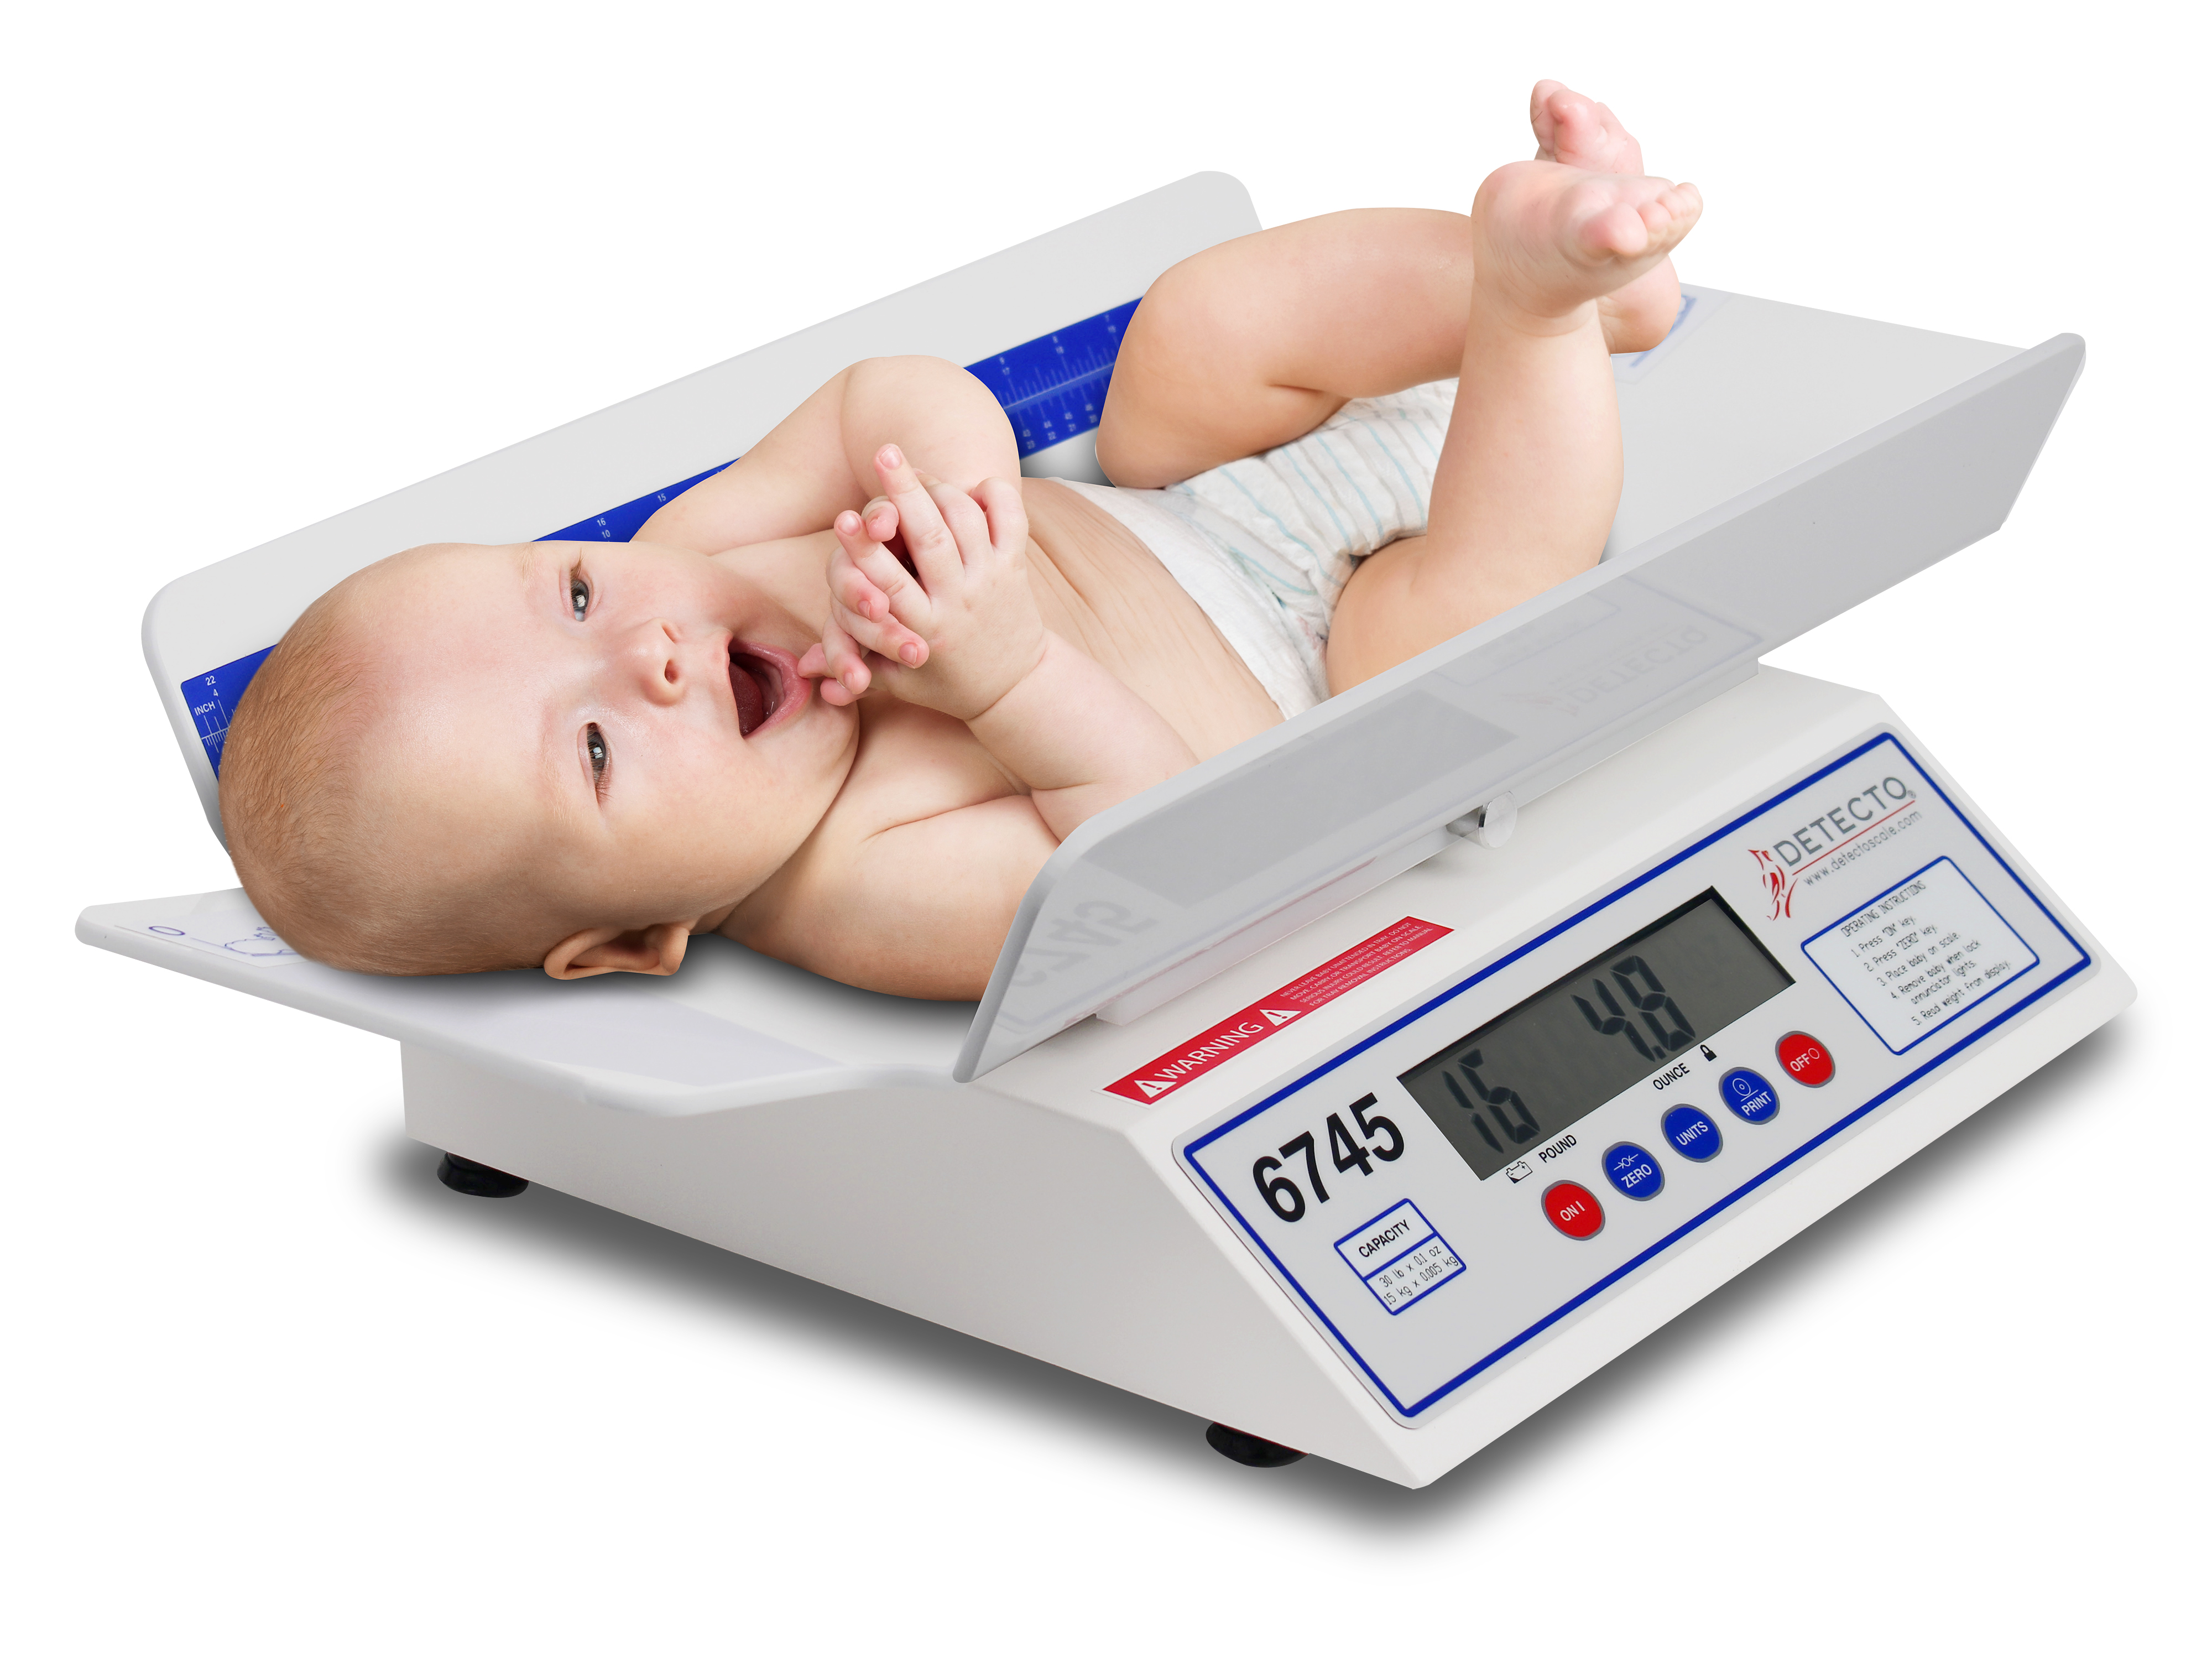 https://cardinalscale.com/themes/ee/site/default/asset/img/product/6745_Baby-Weighing-2.jpg